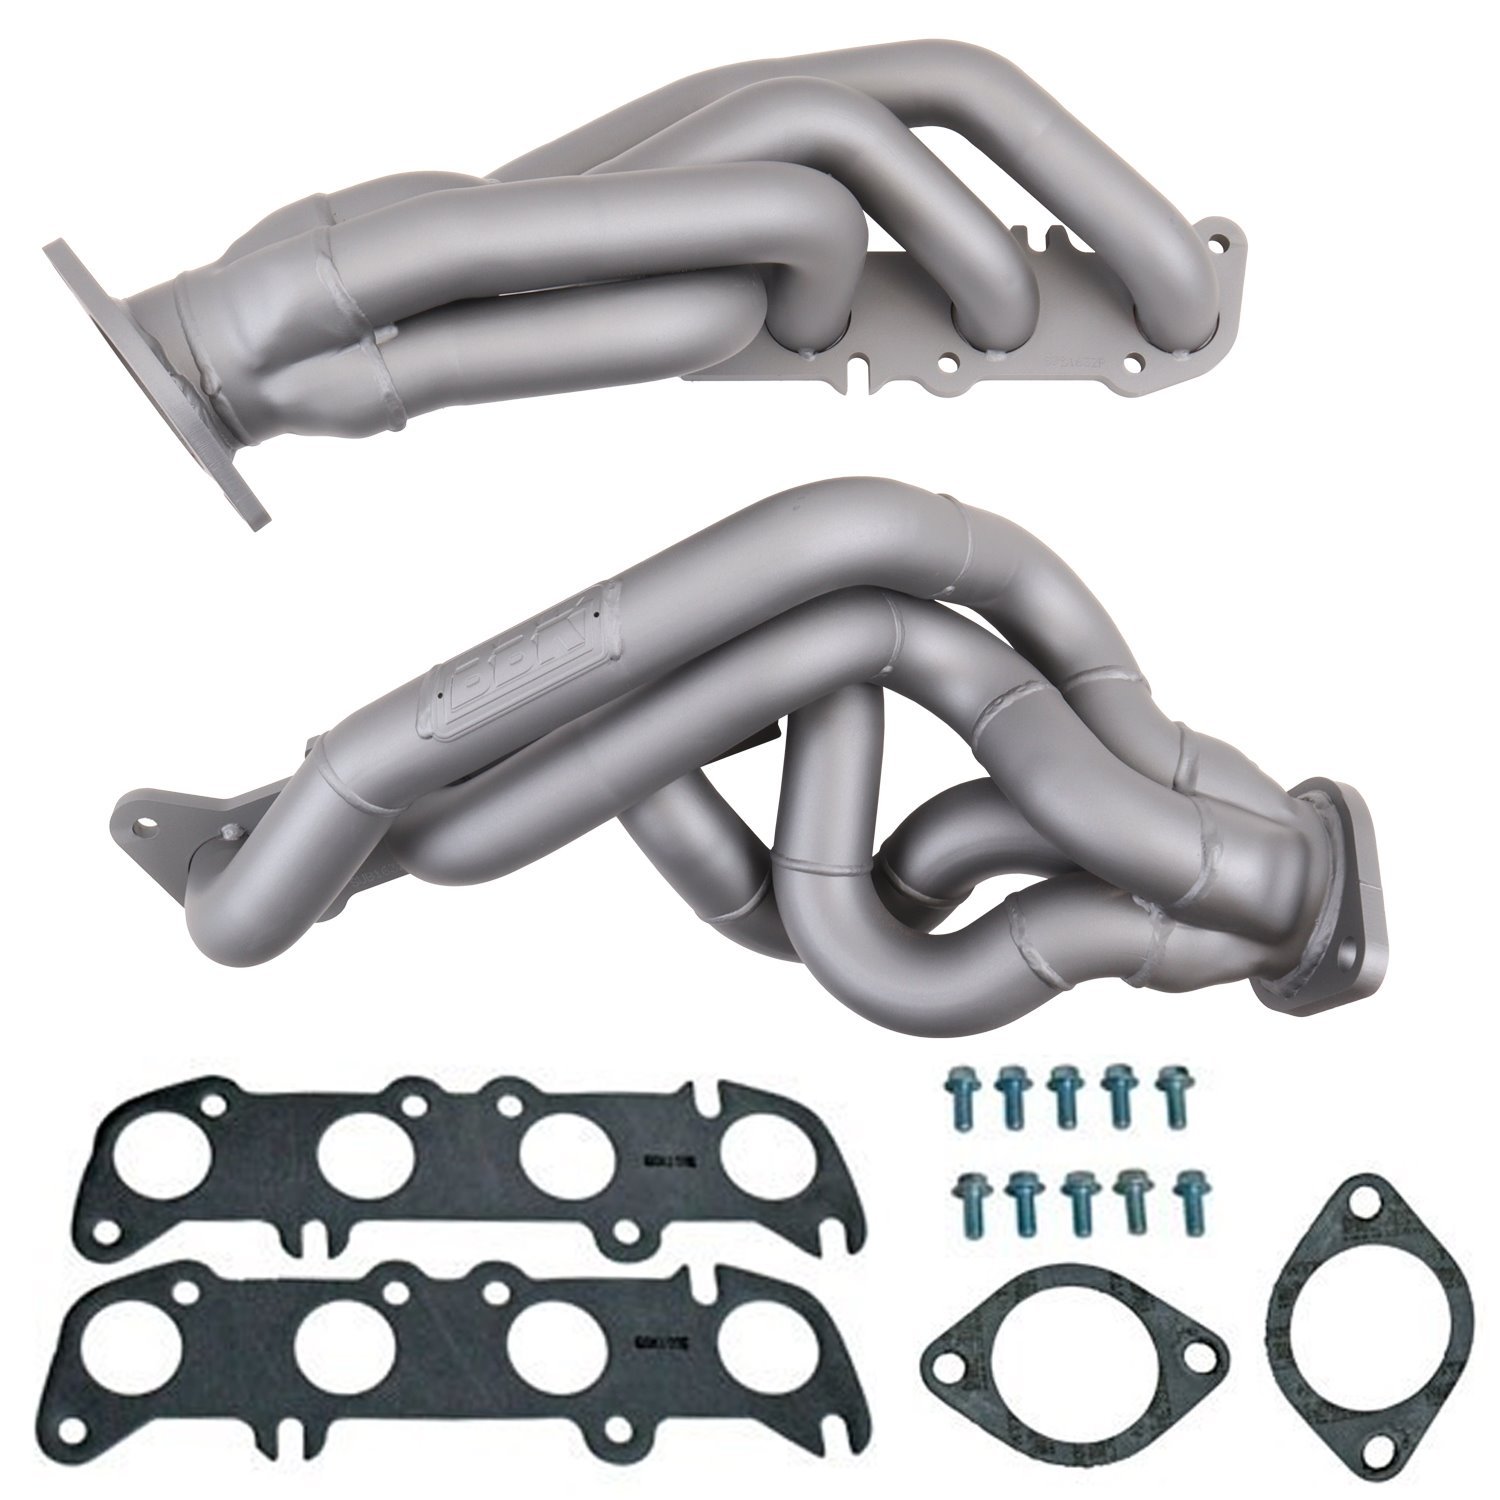 Tuned Shorty-Length Headers 2011-2014 Ford Mustang GT 5.0L [Titanium Ceramic]